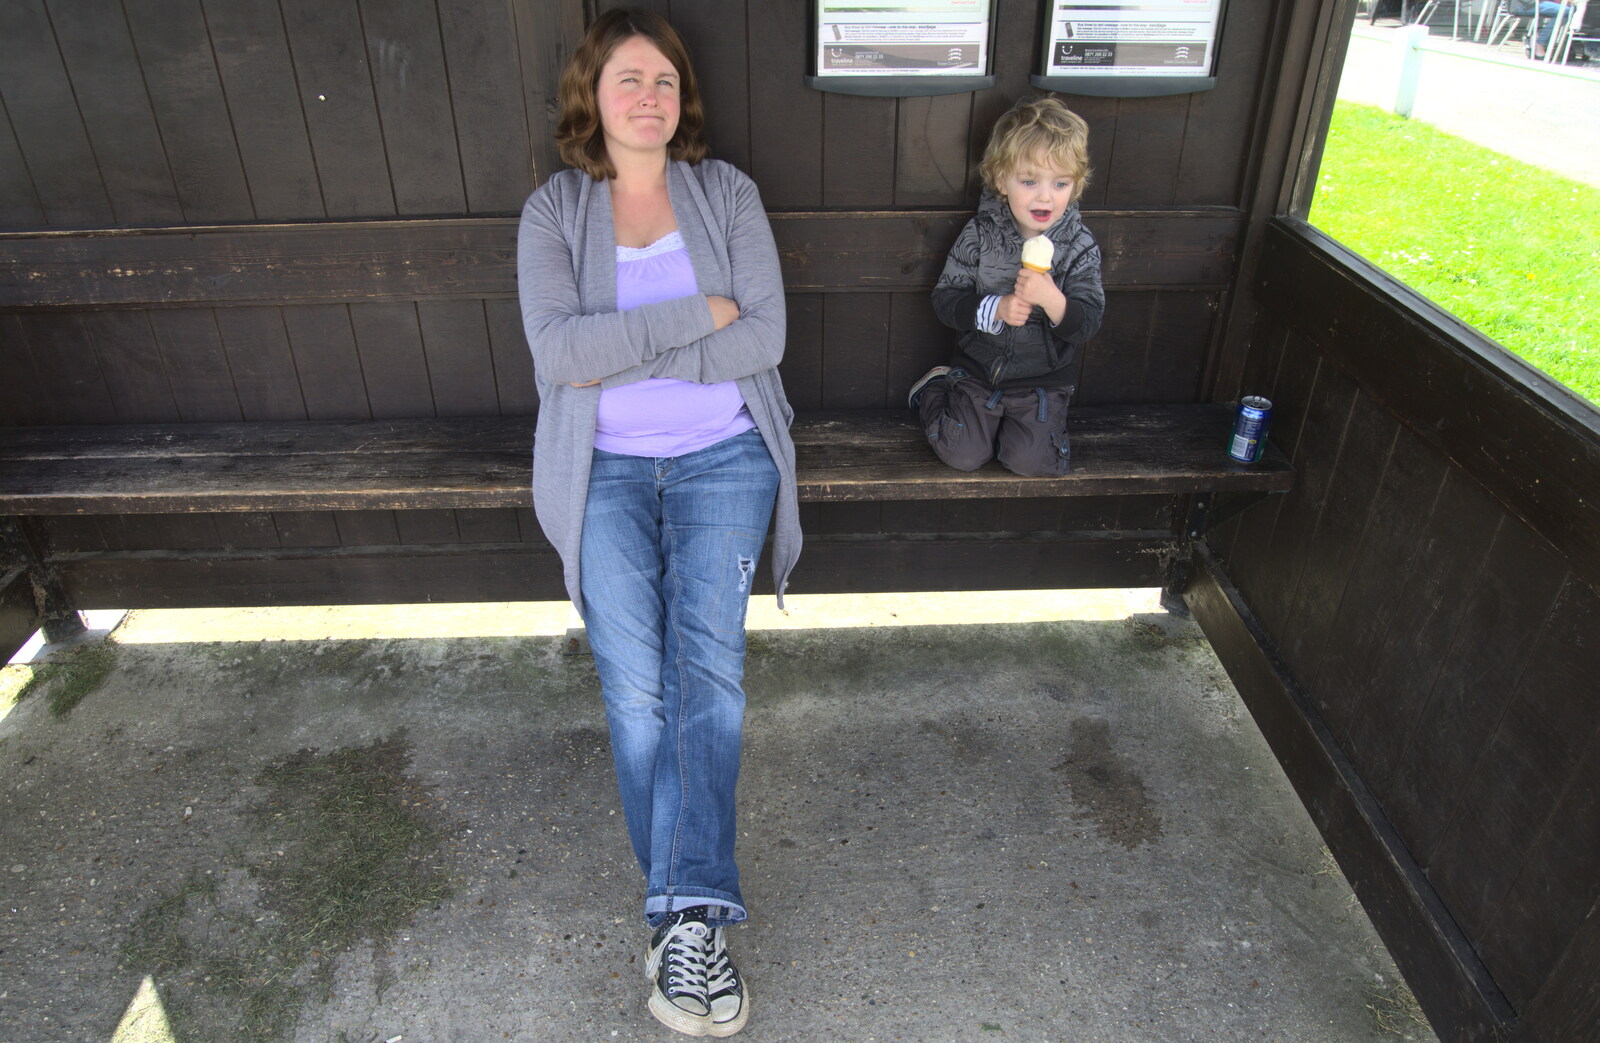 Isobel and Fred in a bus shelter from The BSCC Cycling Weekend, The Swan Inn, Thaxted, Essex - 12th May 2012